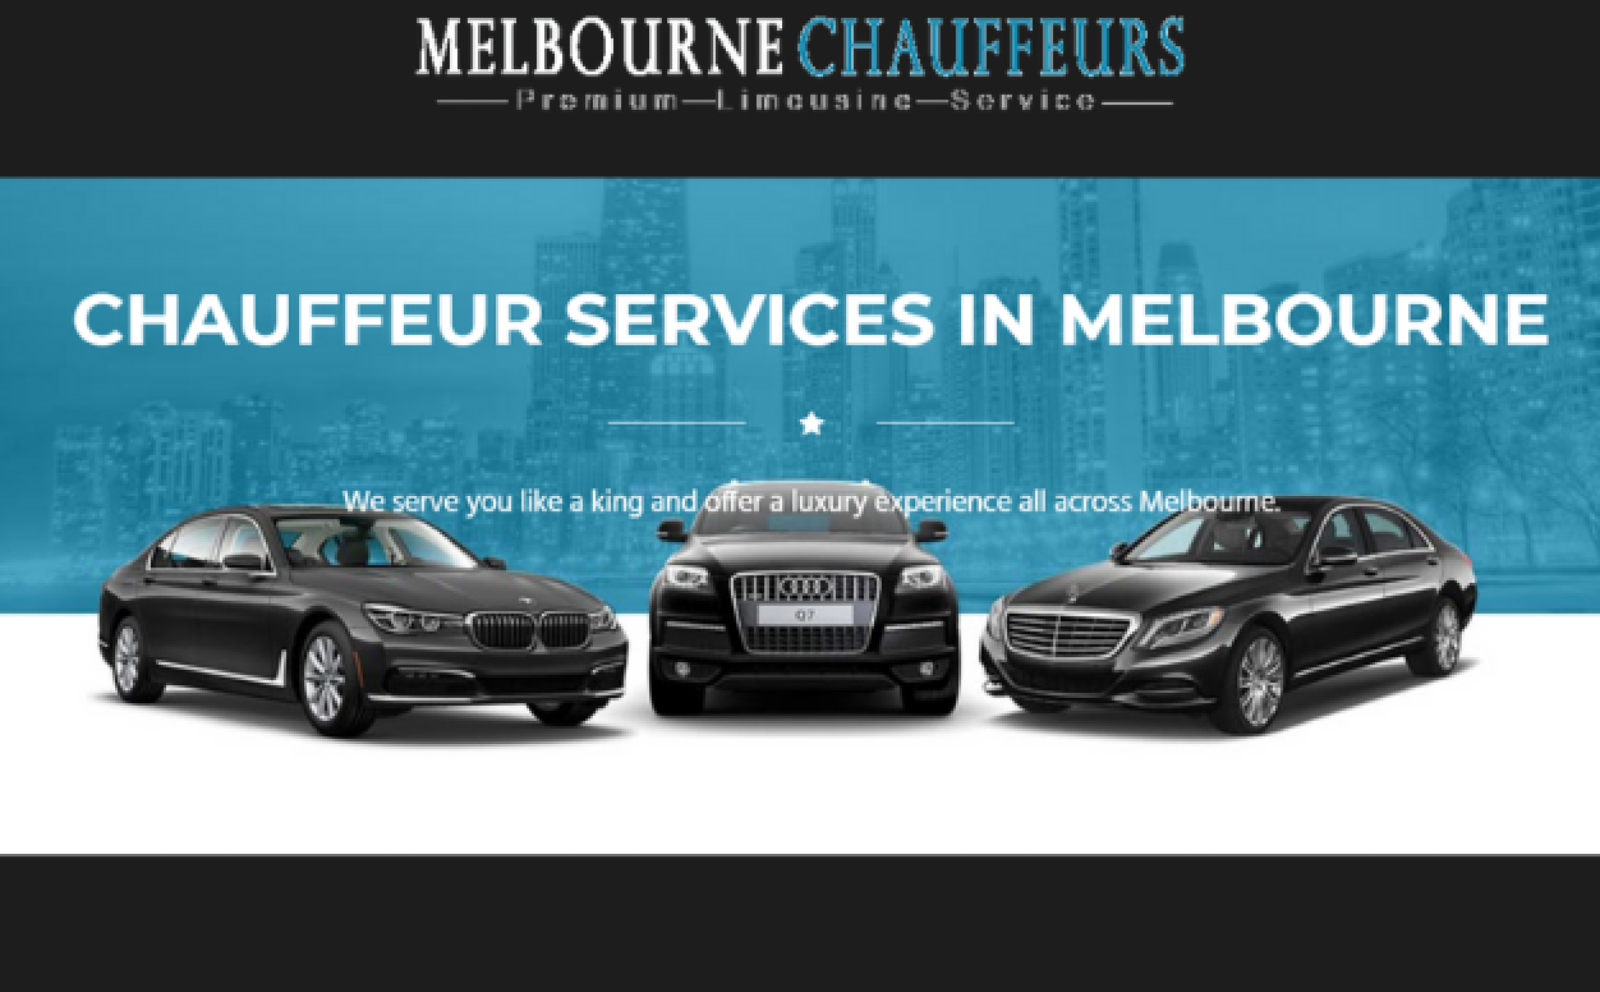 Melbourne Chauffeurs Services – Airport Transfer Service